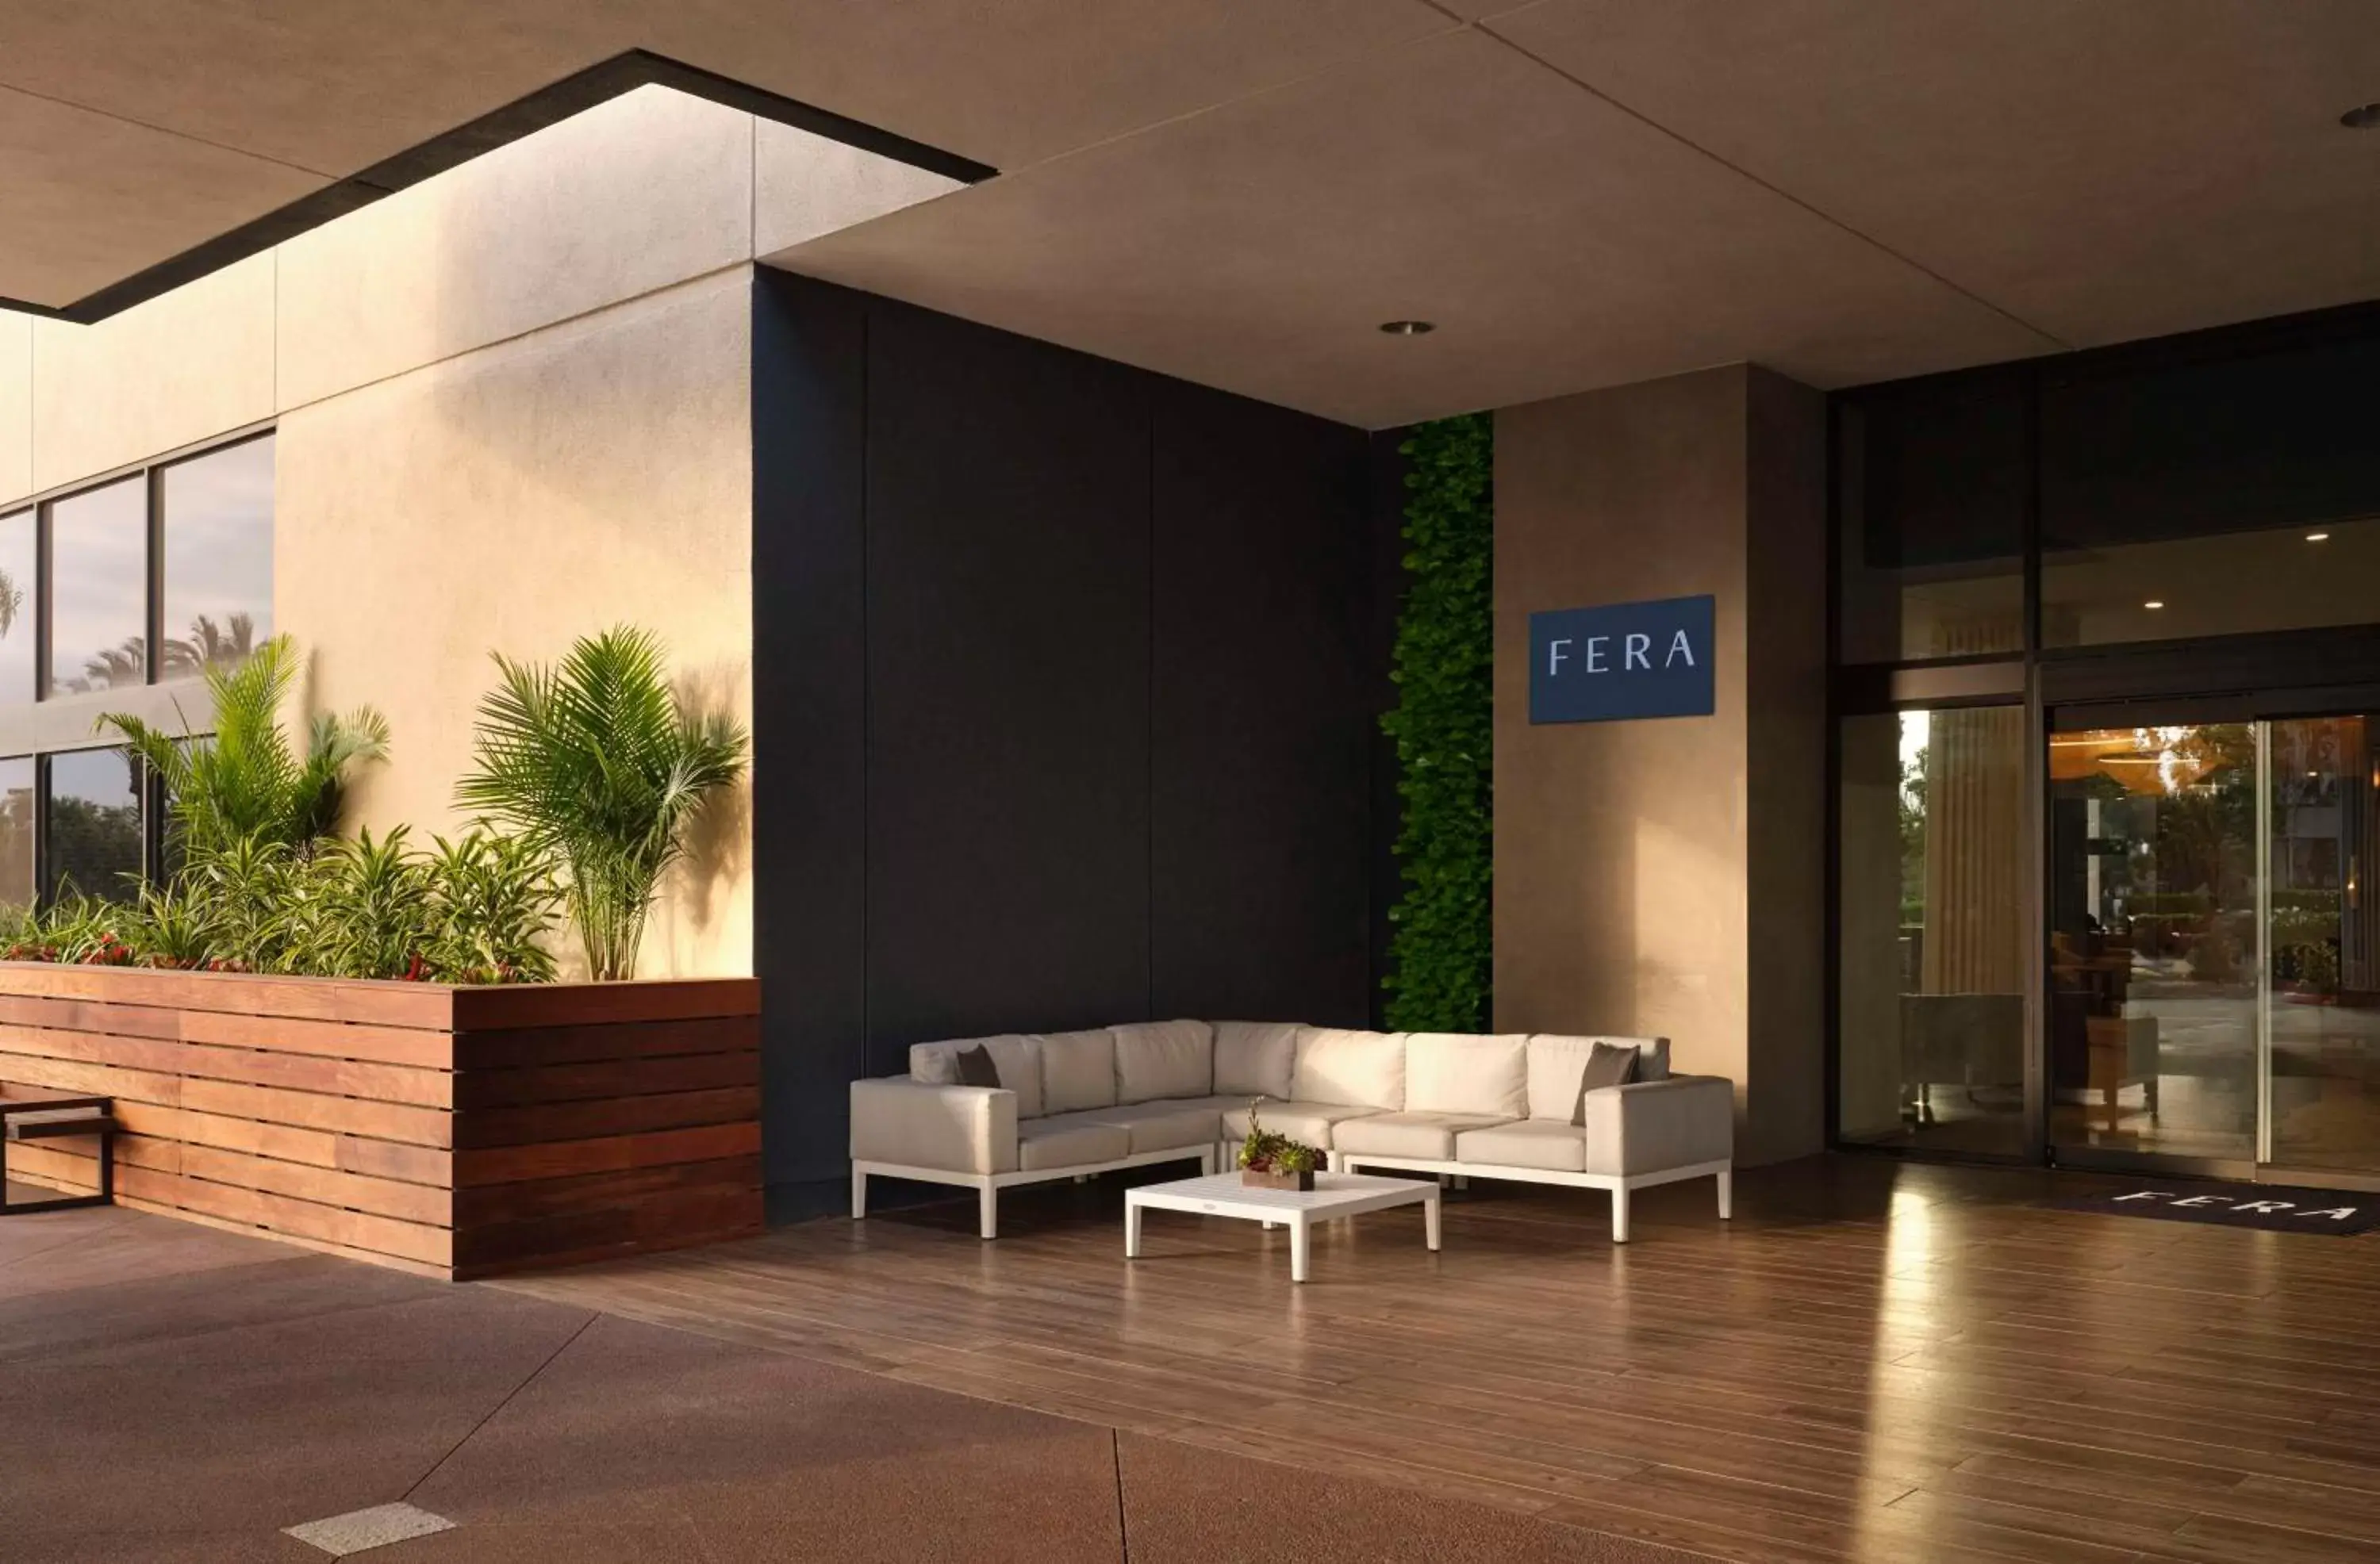 Property building in Hotel Fera Anaheim, a DoubleTree by Hilton Hotel